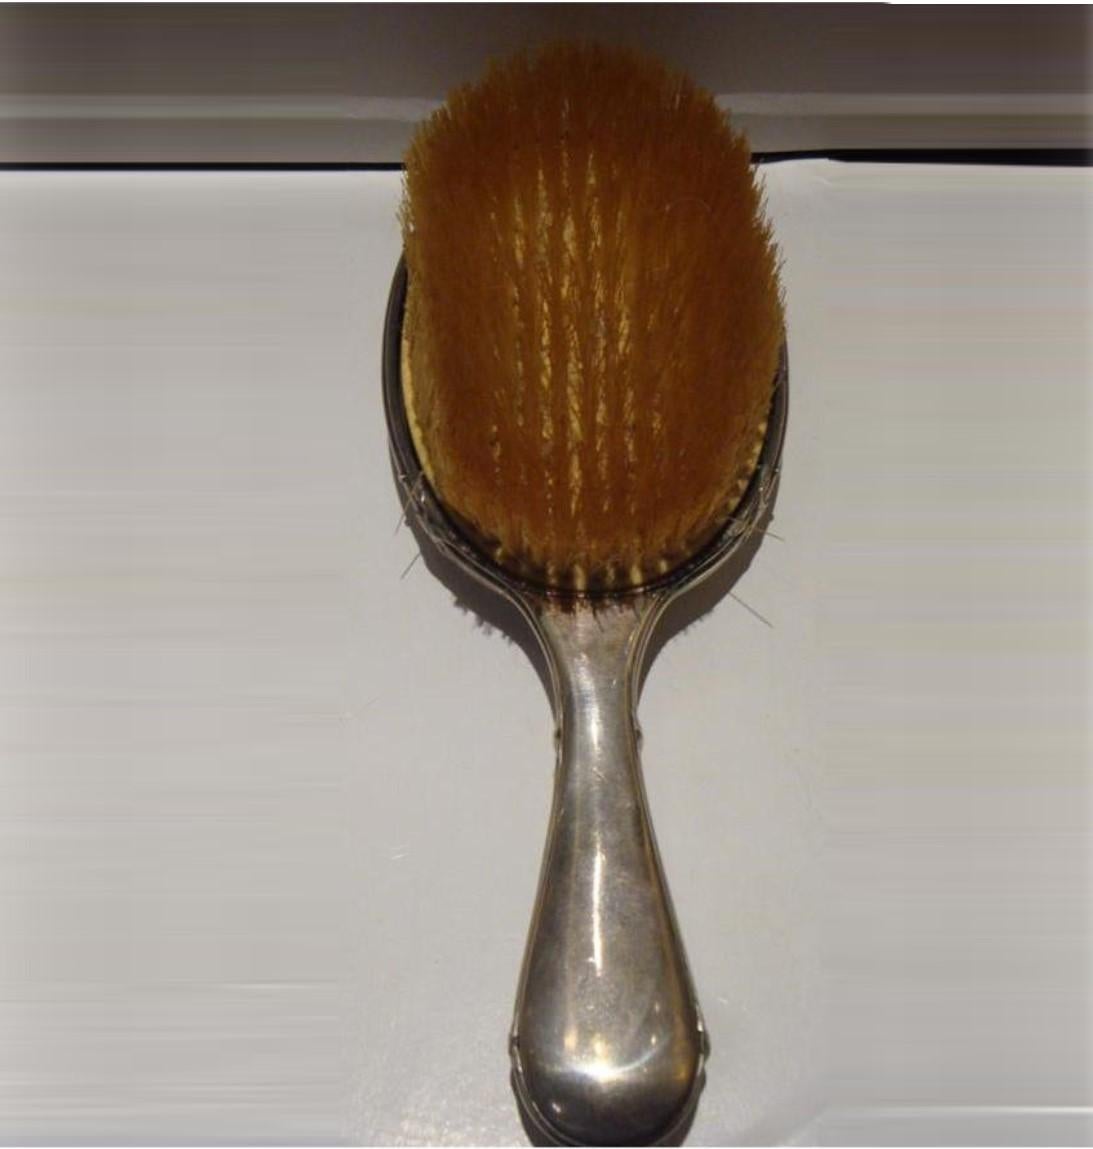 The Following Items we are Offering is An Outstanding Museum Quality French 19th Century Sterling Silver Hair Brush by Maison BOIN TABURET with Ivory Relief. TAKEN OUT OF AN IMPORTANT ESTATE. TRULY A RARE FIND!!!  

Measurements: 9 1/4